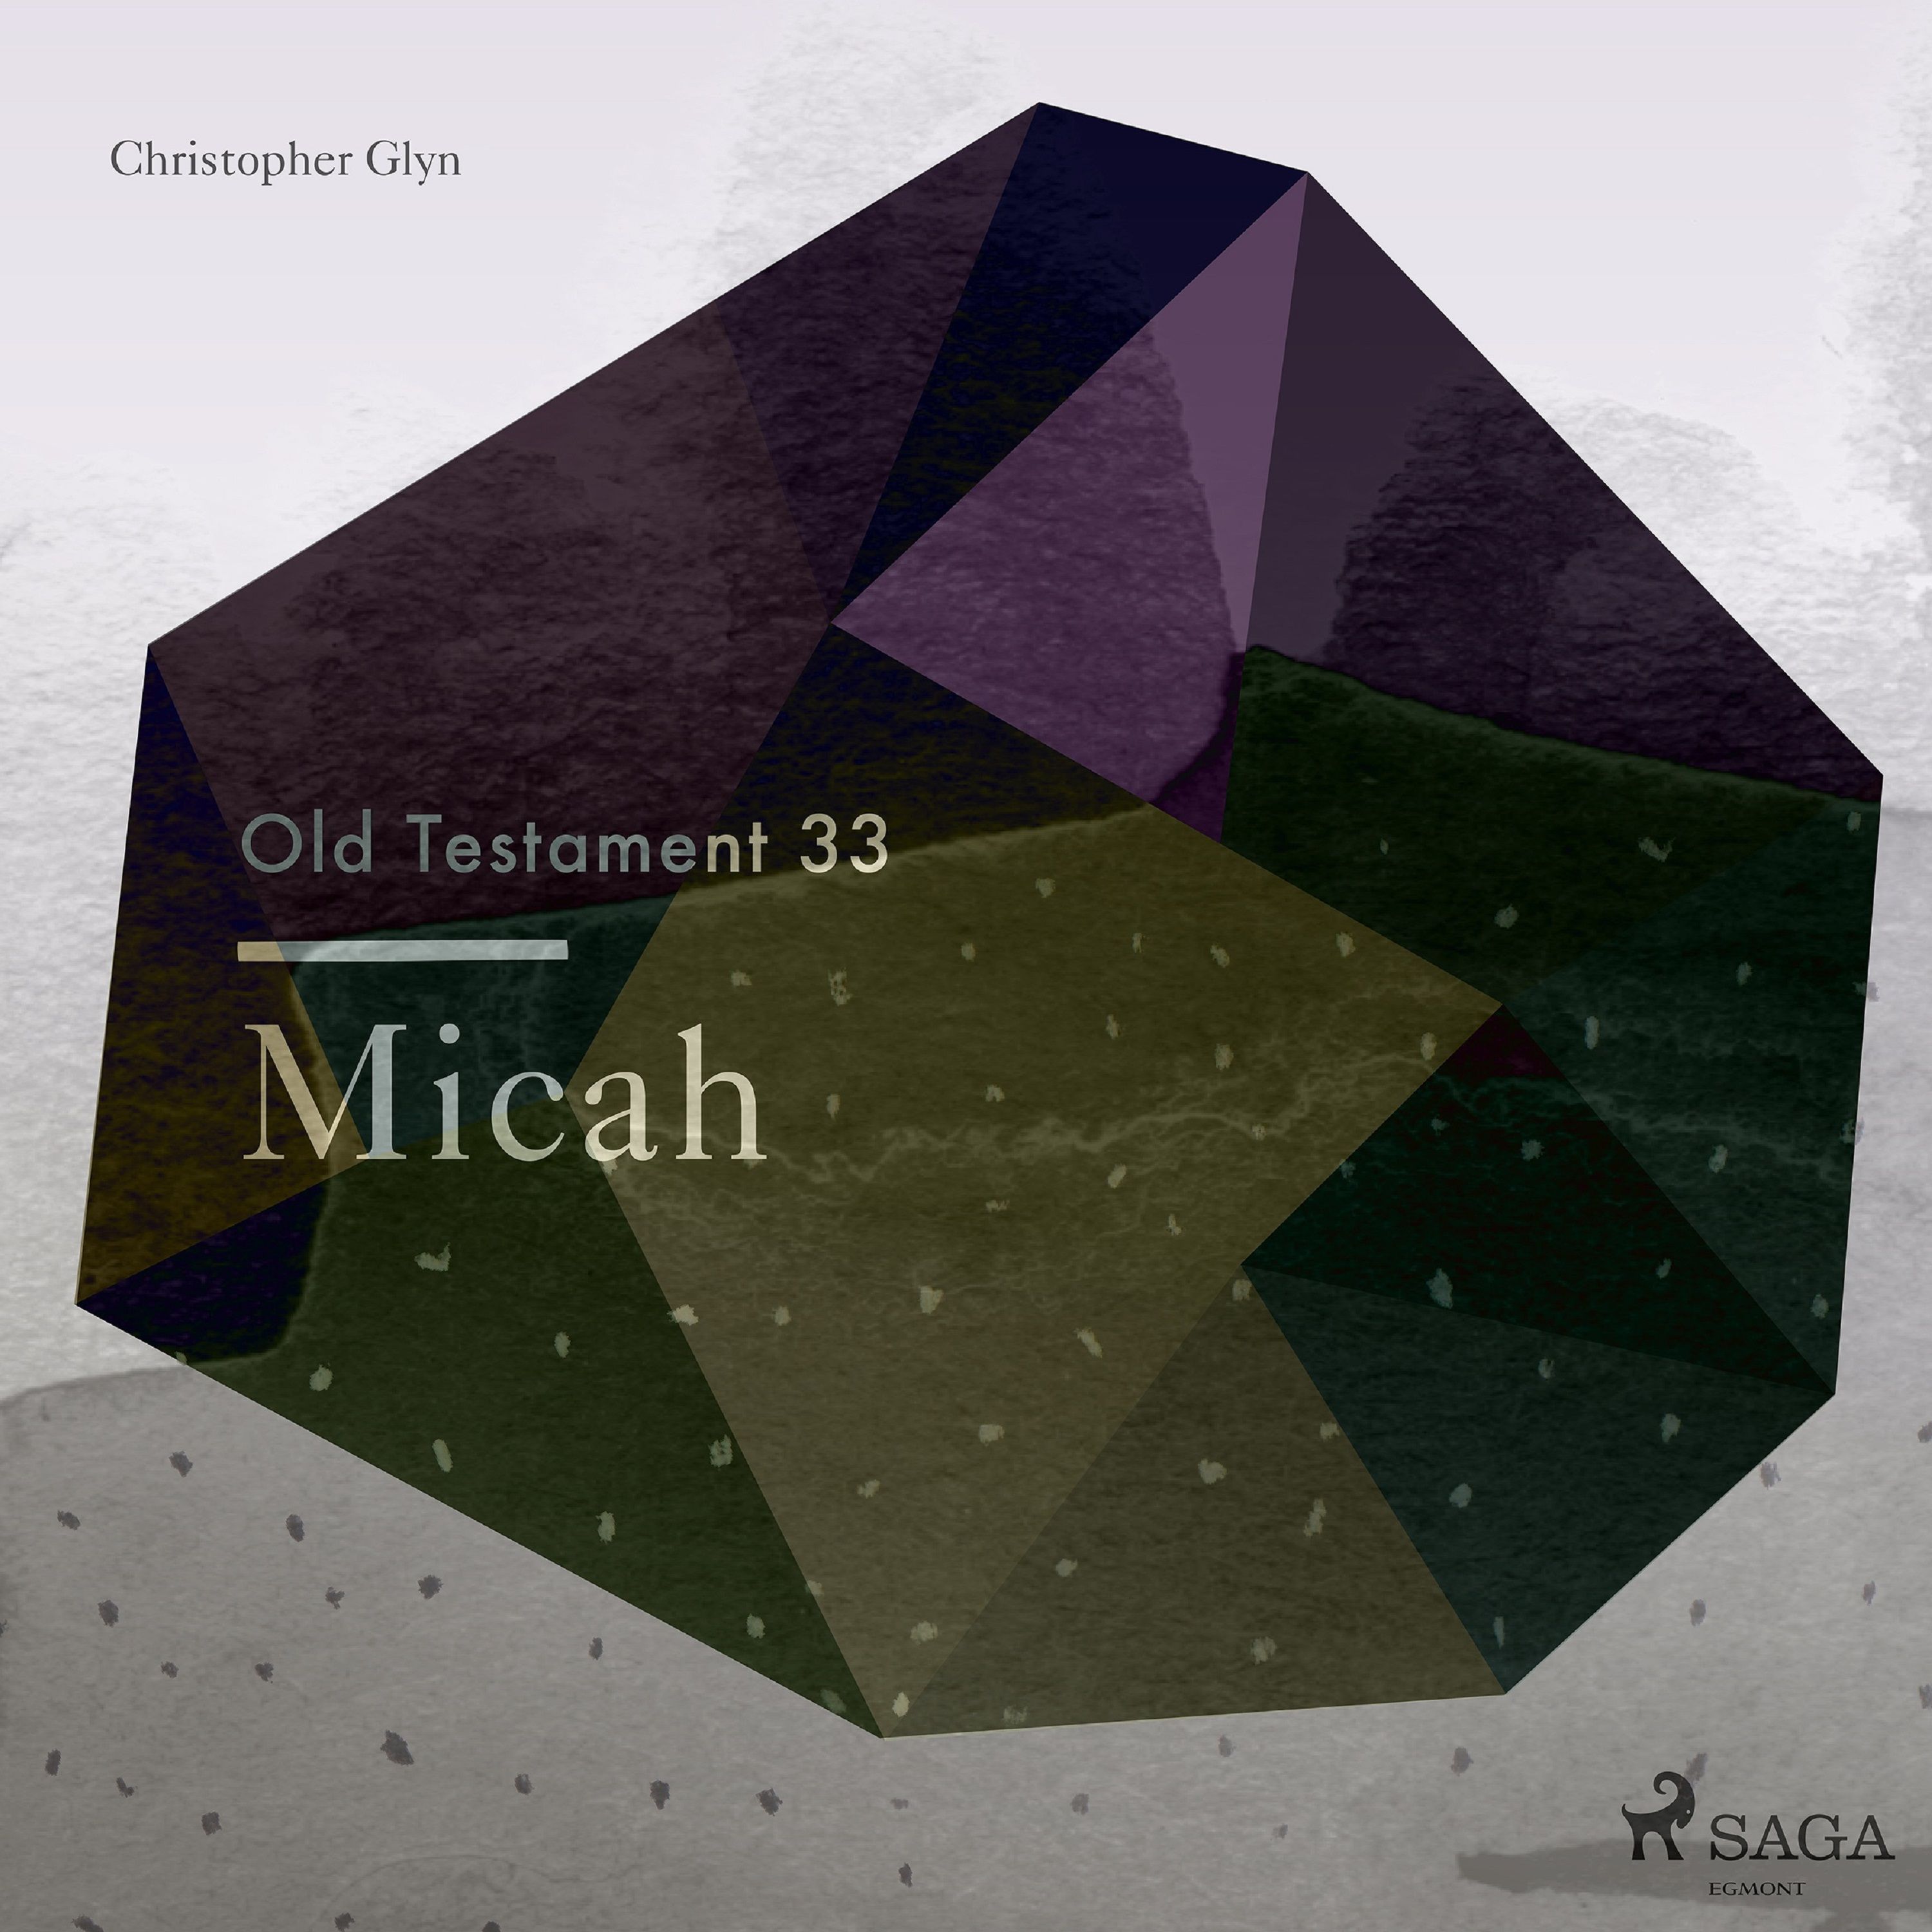 The Old Testament 33 - Micah, audiobook by Christopher Glyn